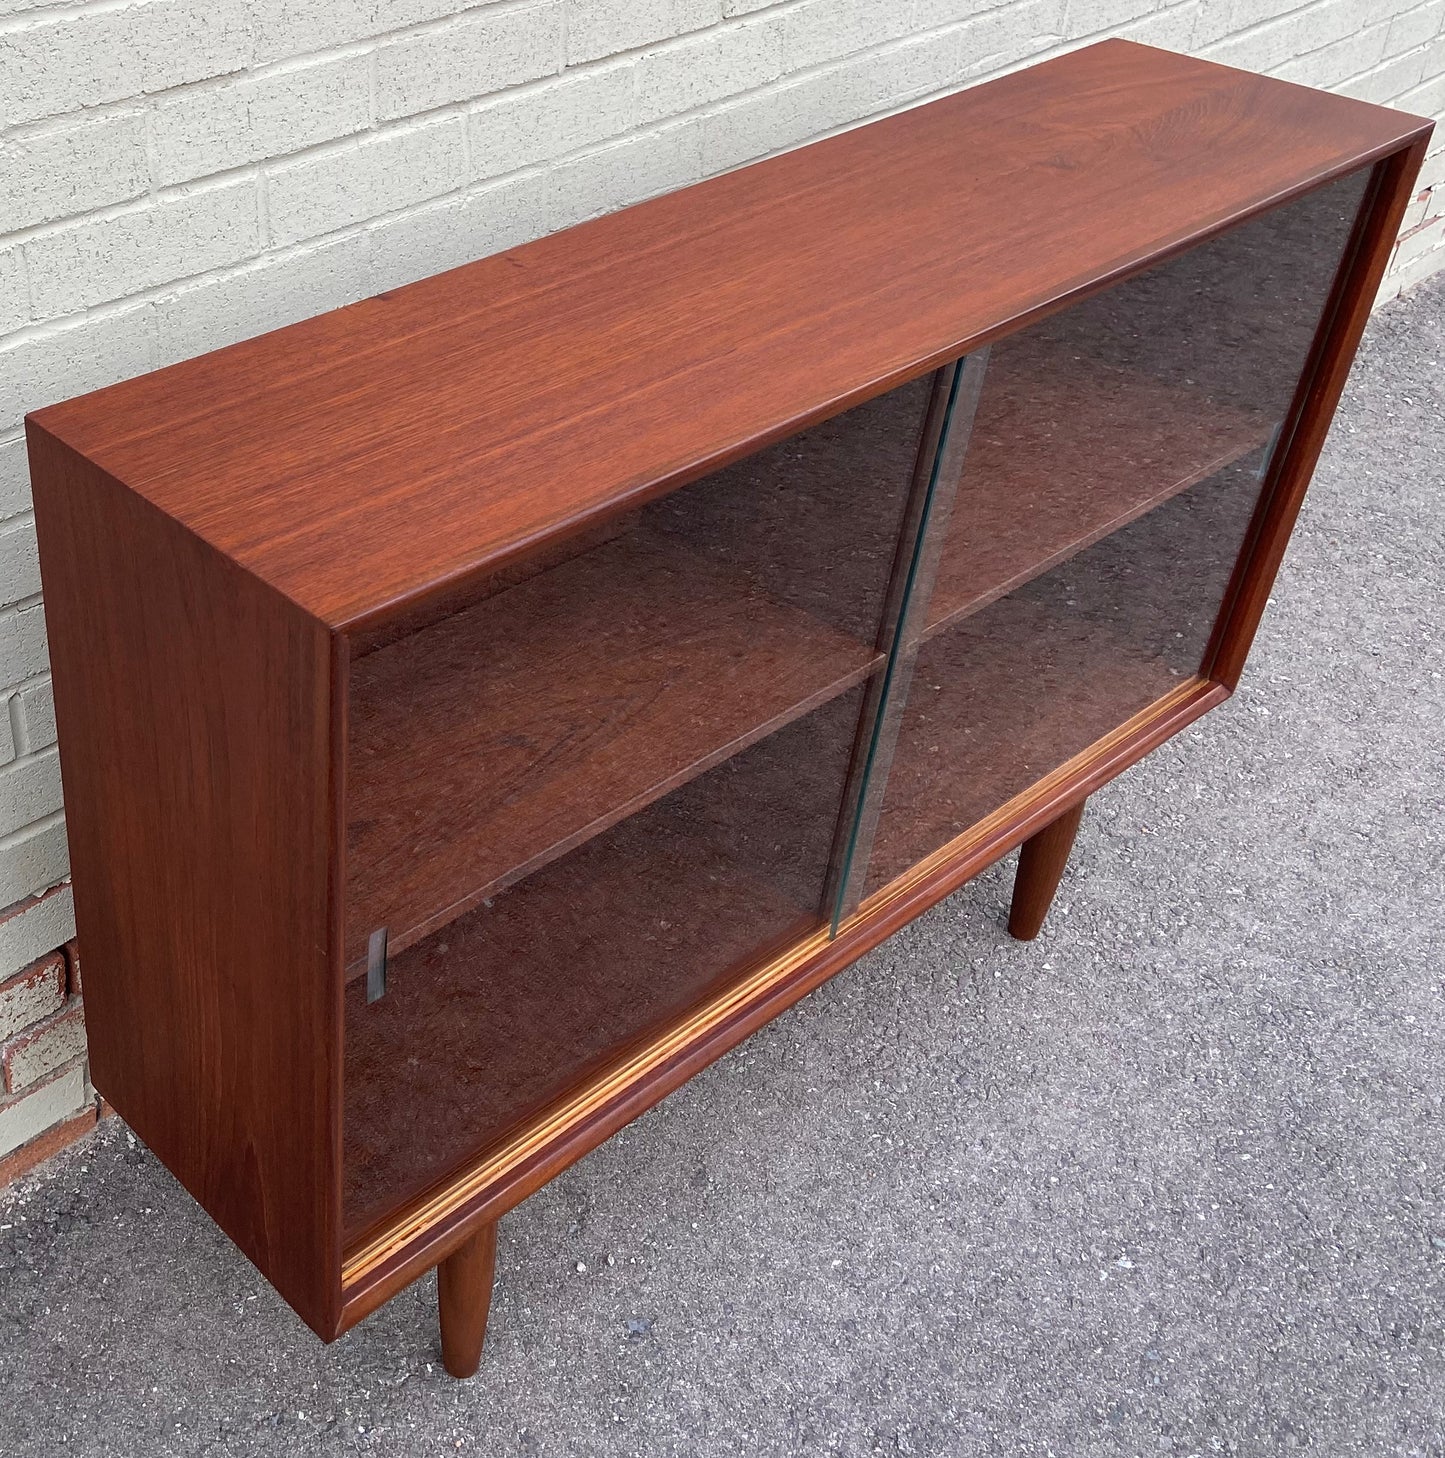 REFINISHED Mid Century Modern Teak Bookcase Display by Punch 4 ft